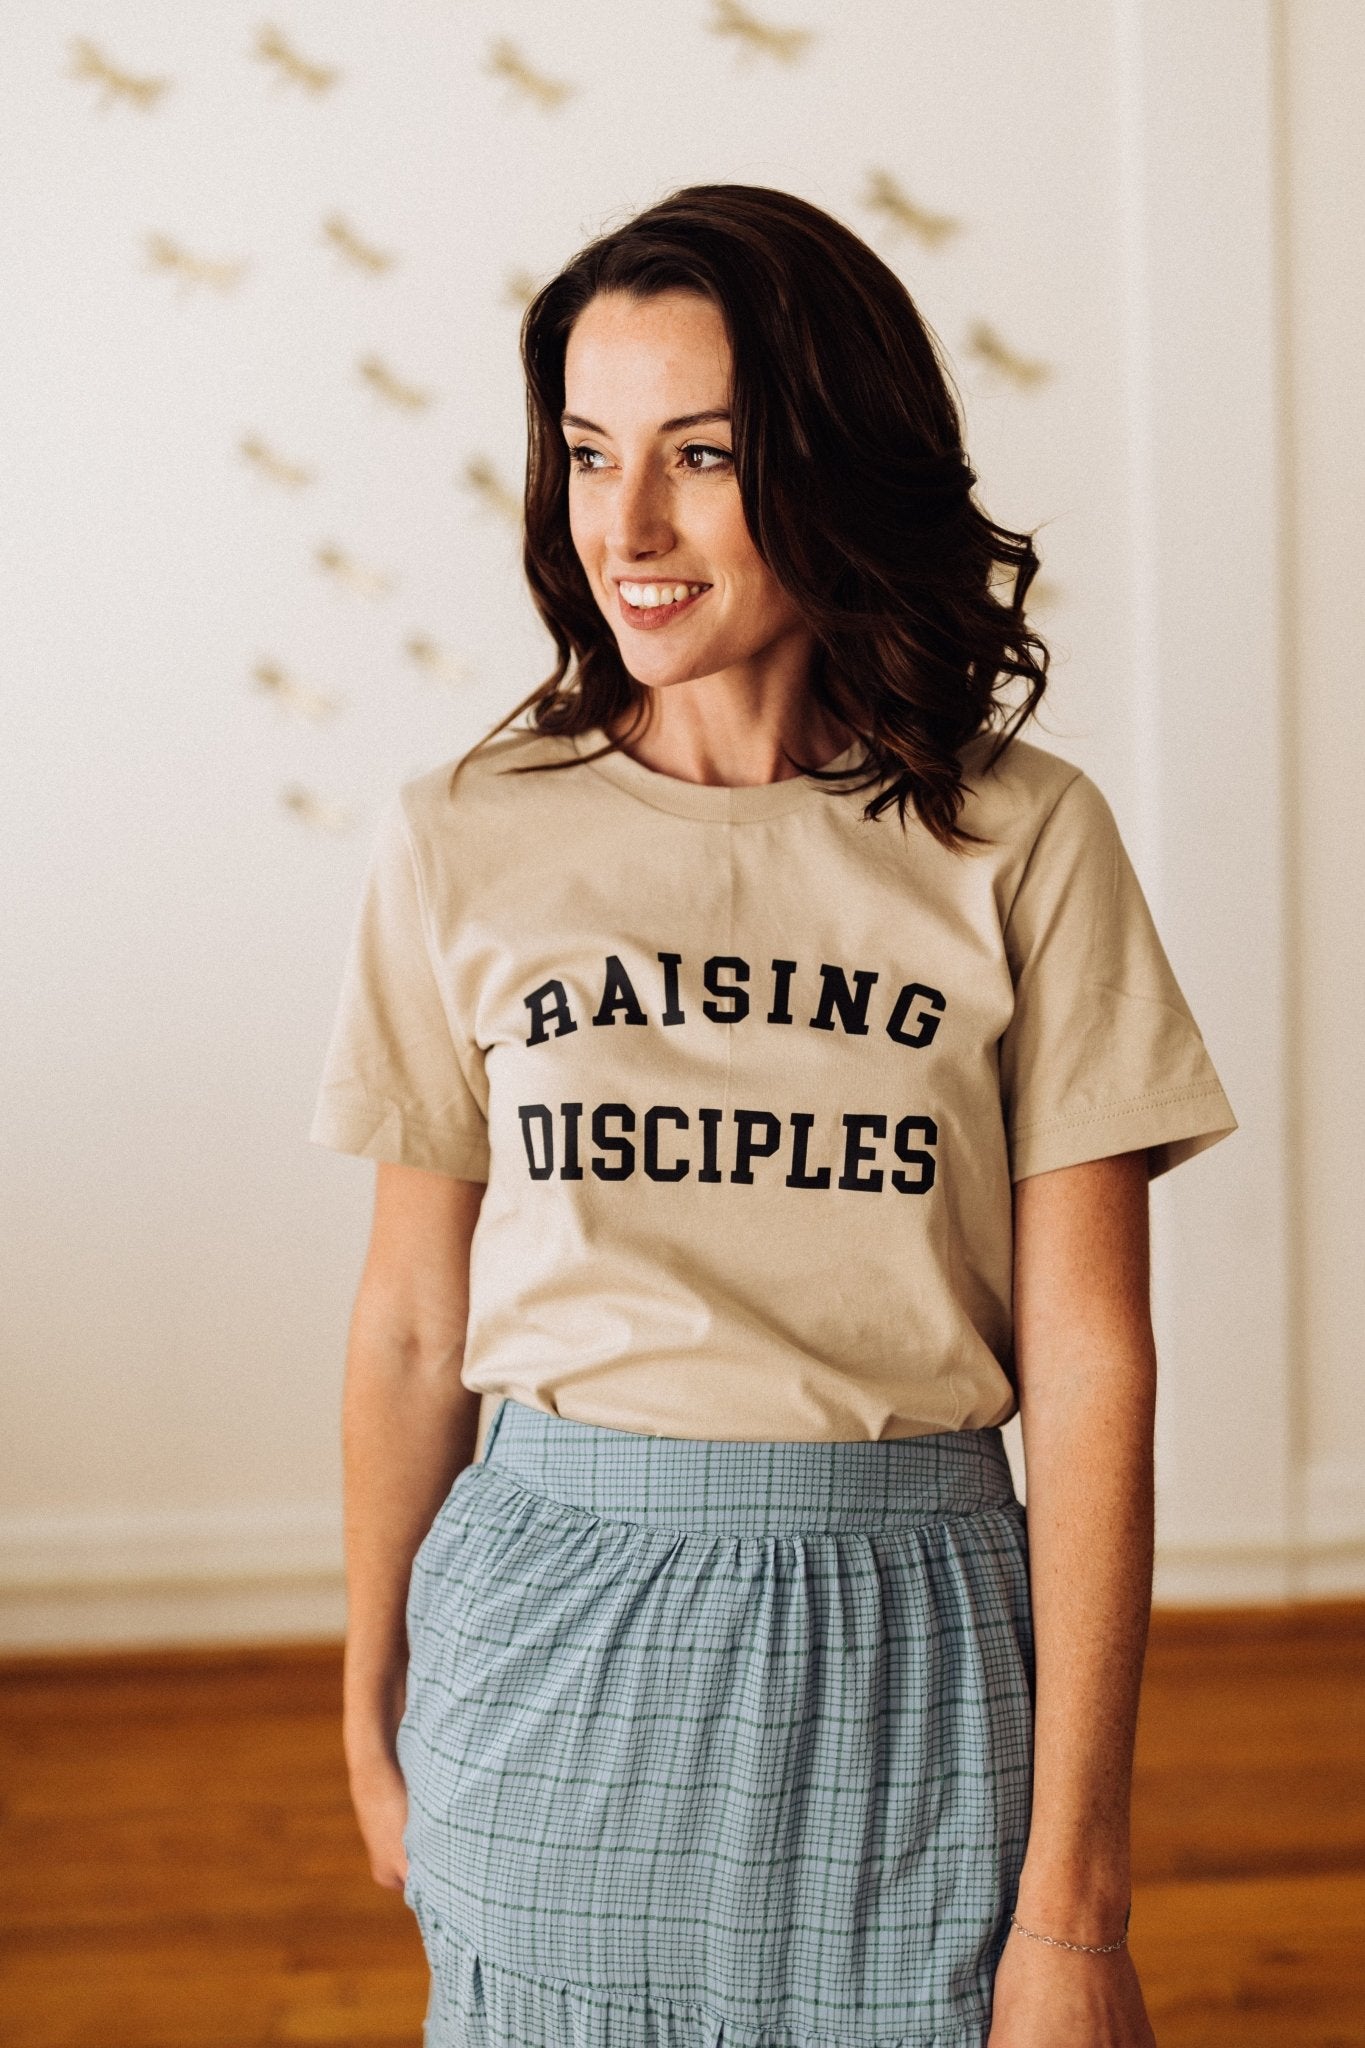 Raising Disciples - The Dragonfly Boutique